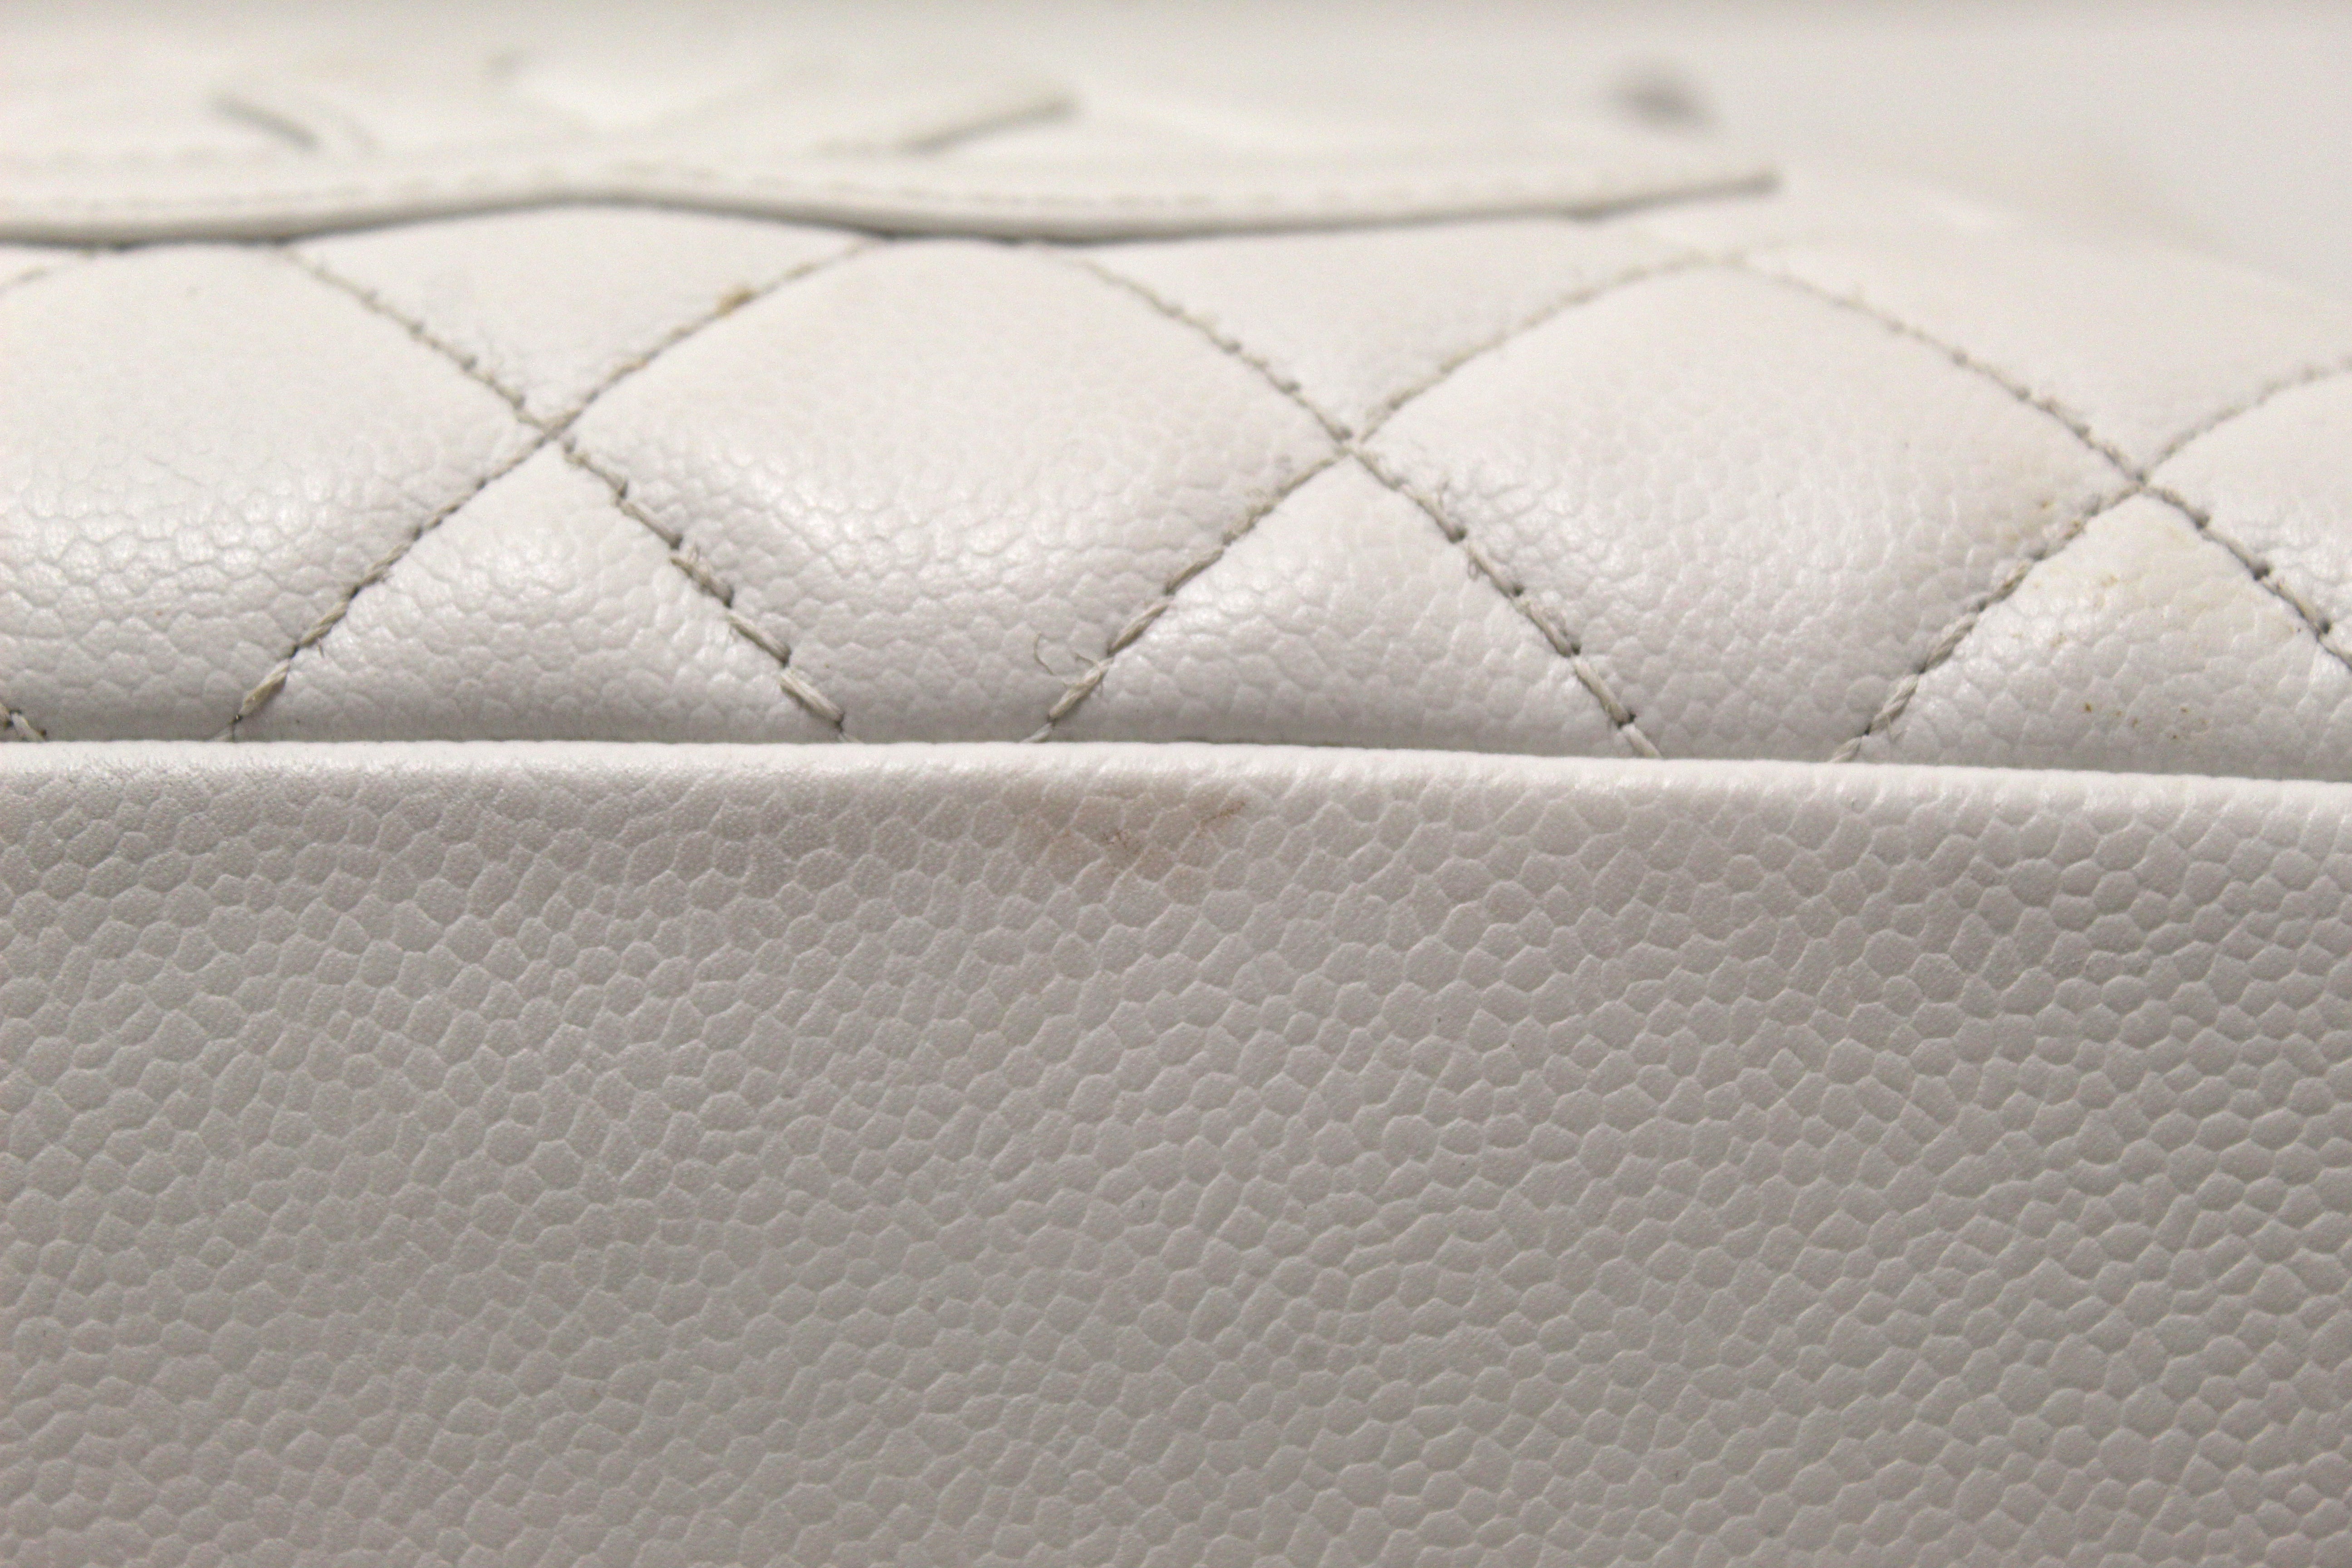 Authentic Chanel White Caviar Leather Petite Shopping Tote